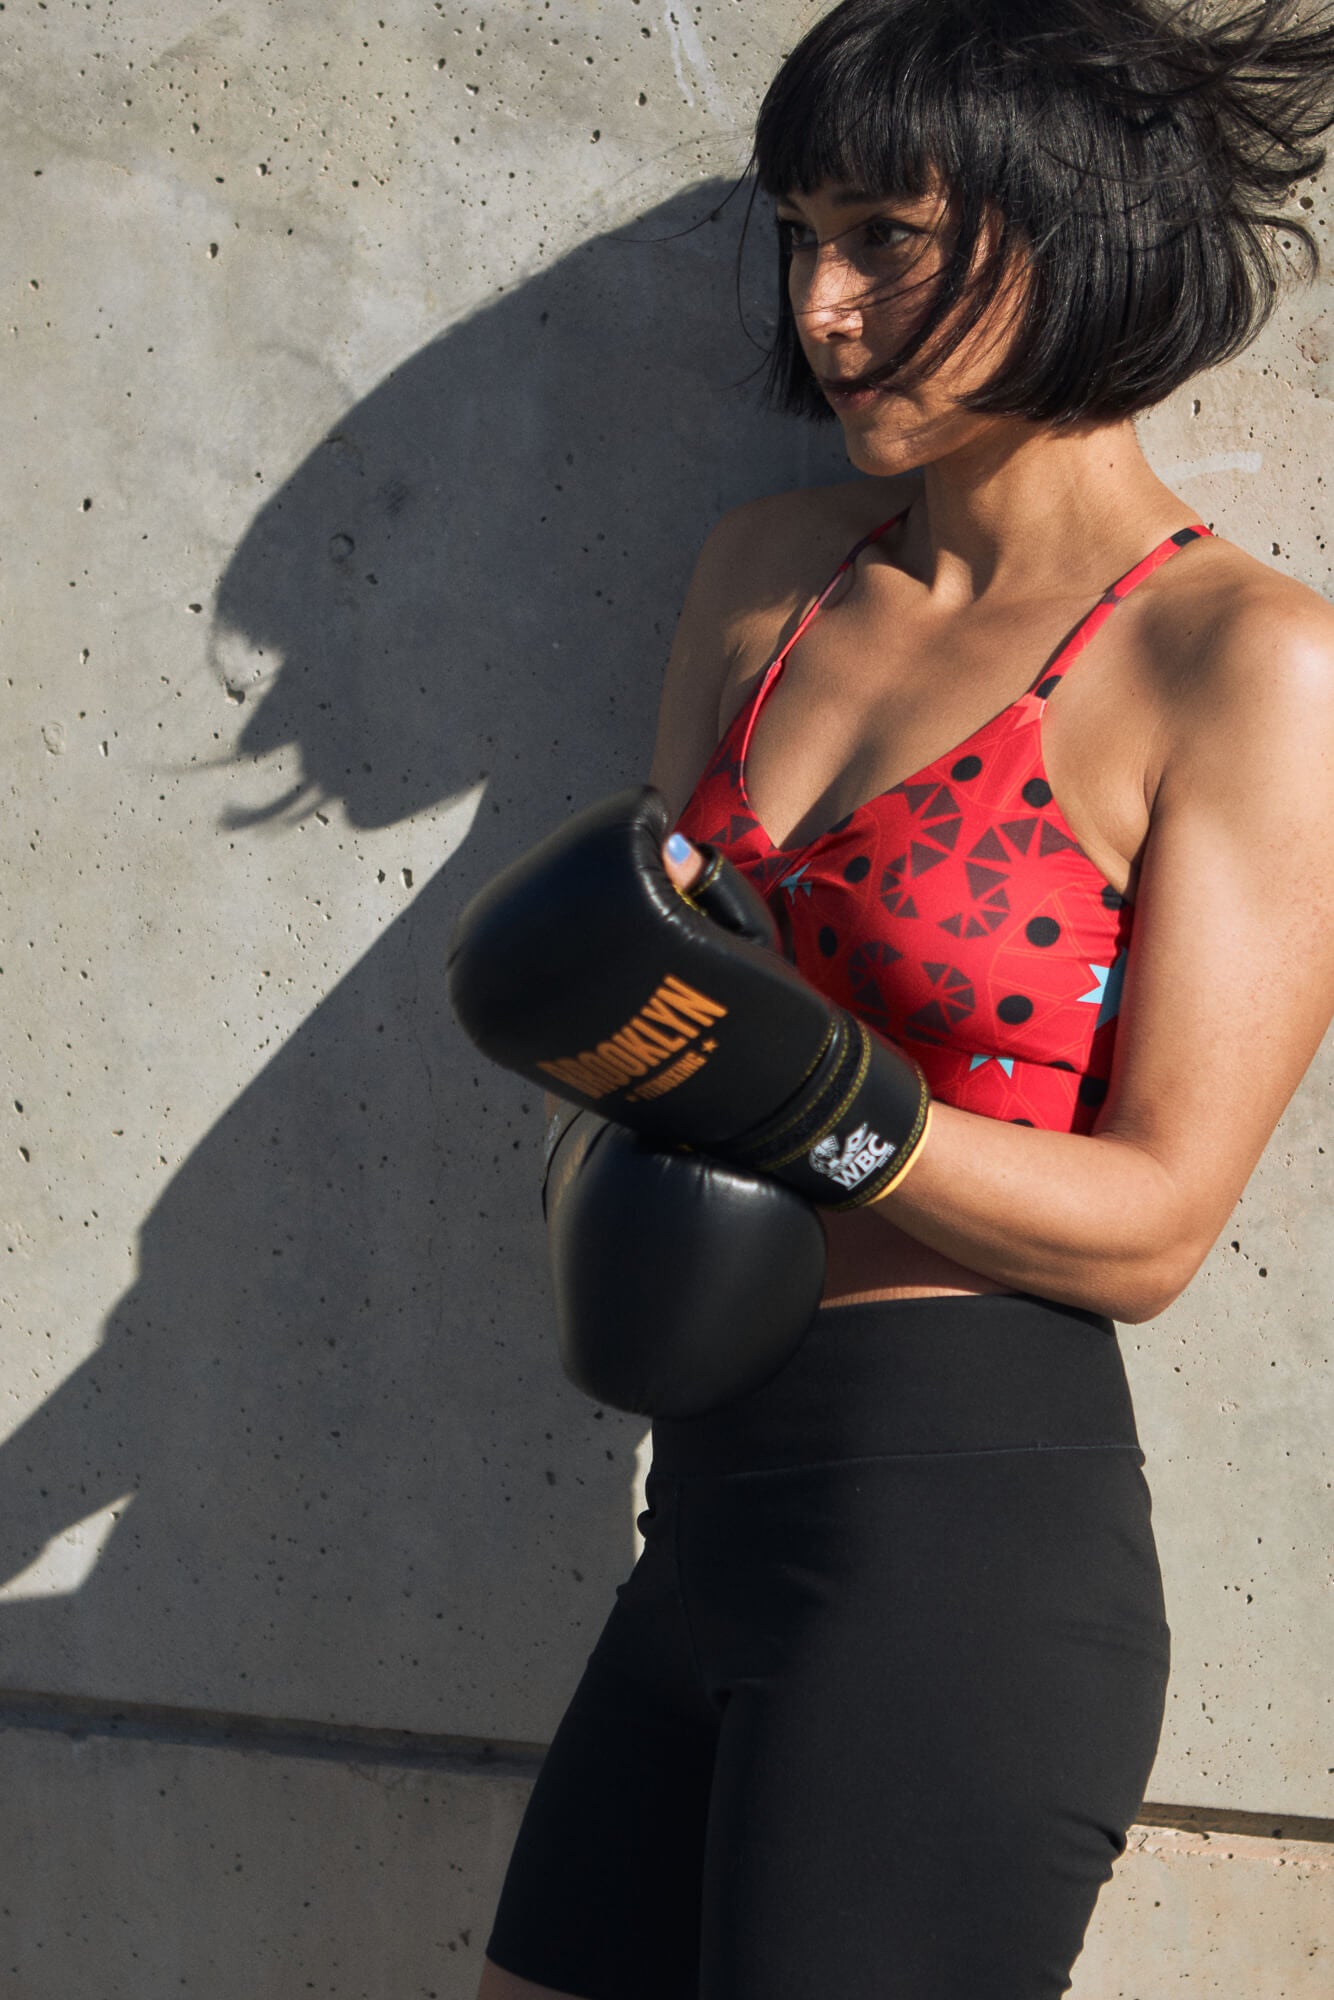 Woman in a red geometric sports bra and a black running tights with boxing gloves.